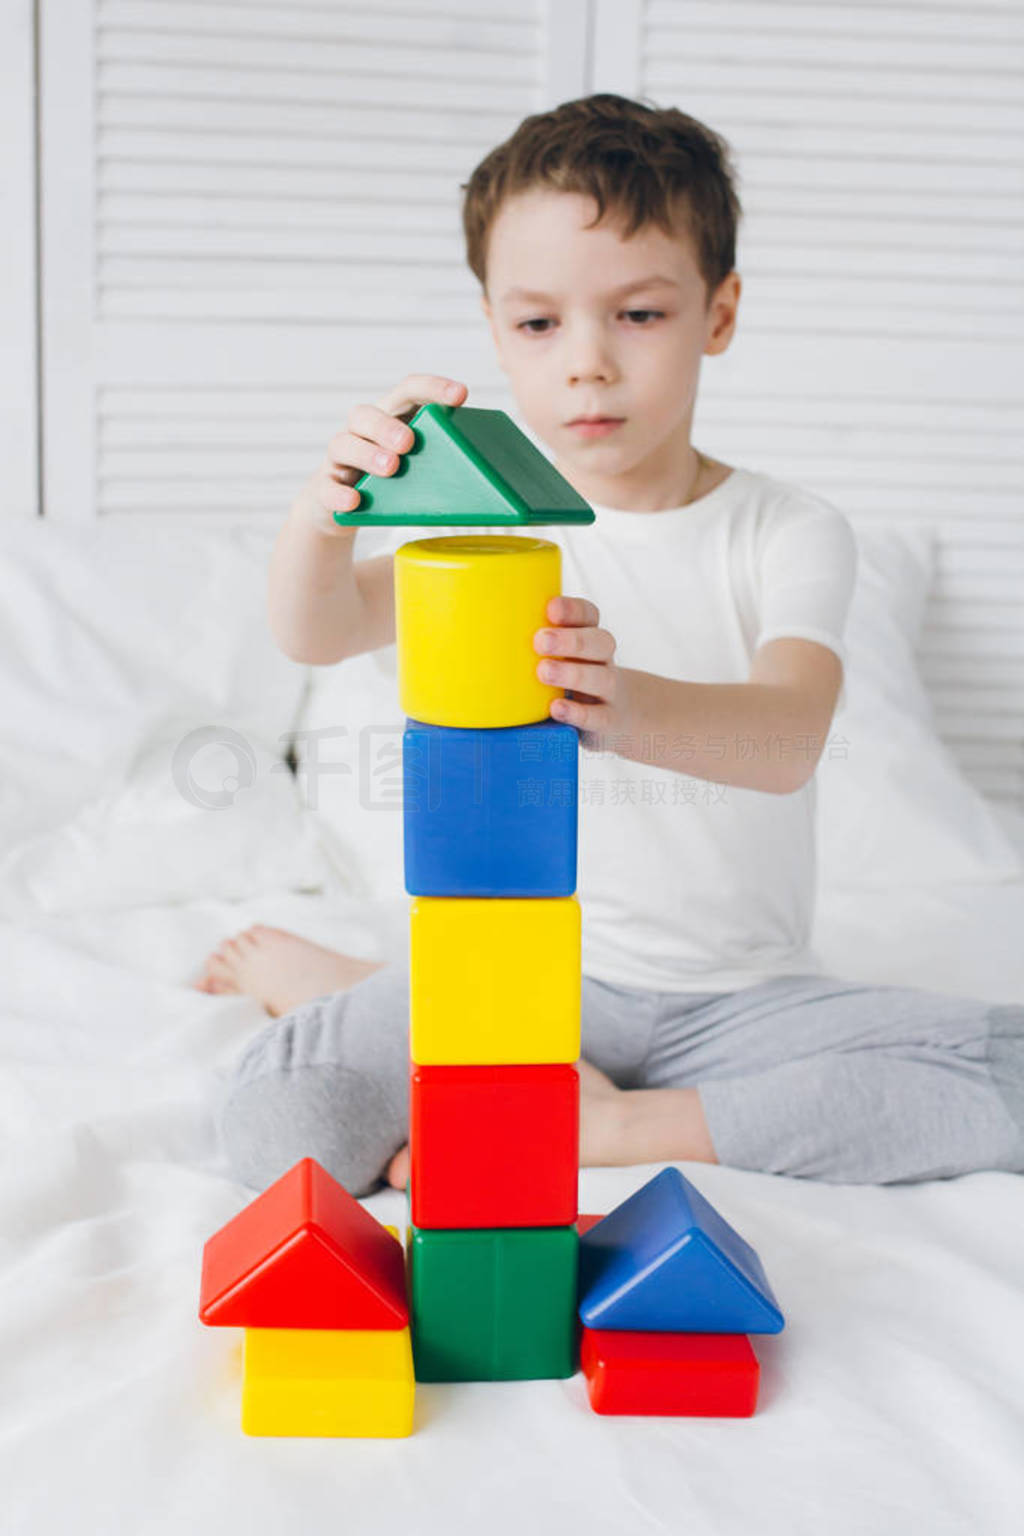 Boy plays and builds a tower of colorful plastic cubes